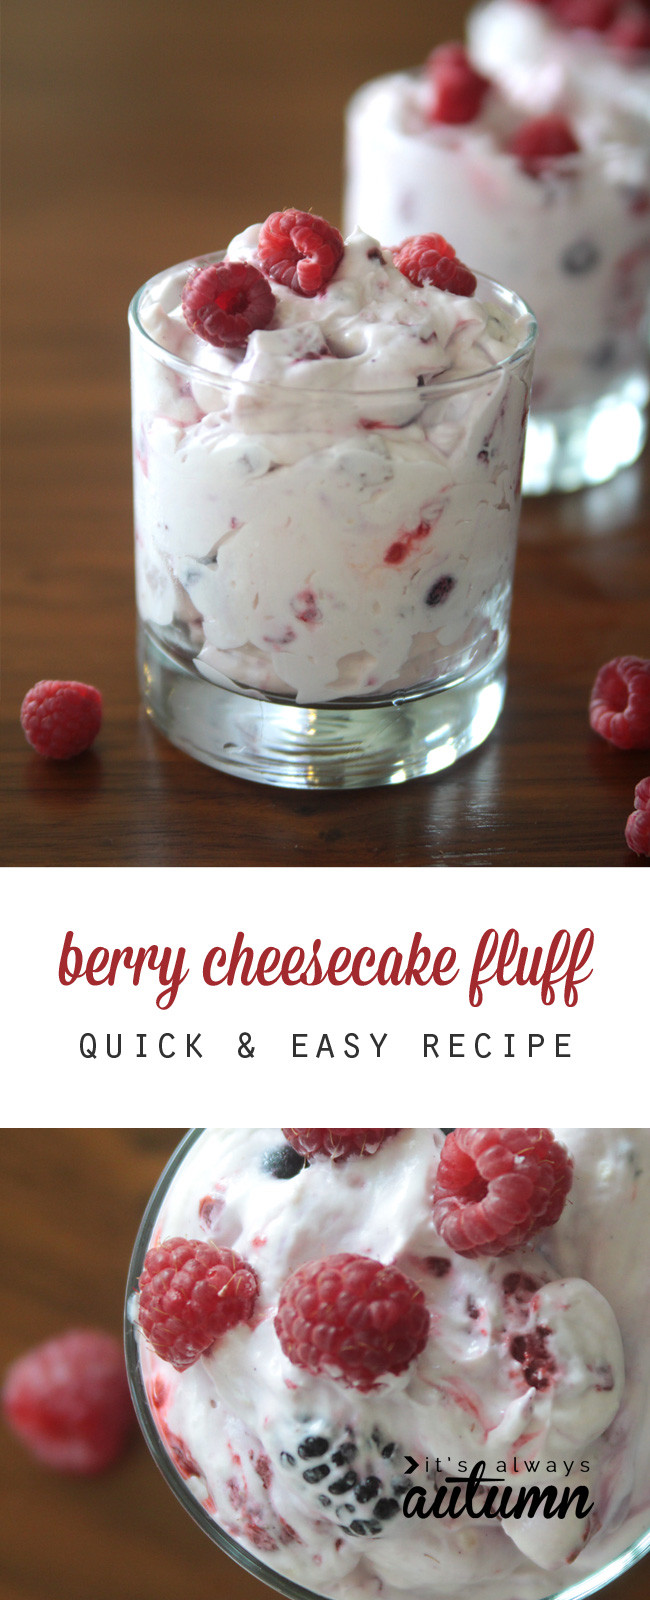 Simple Christmas Desserts Recipe
 berry cheesecake fluff a lighter holiday dessert It s